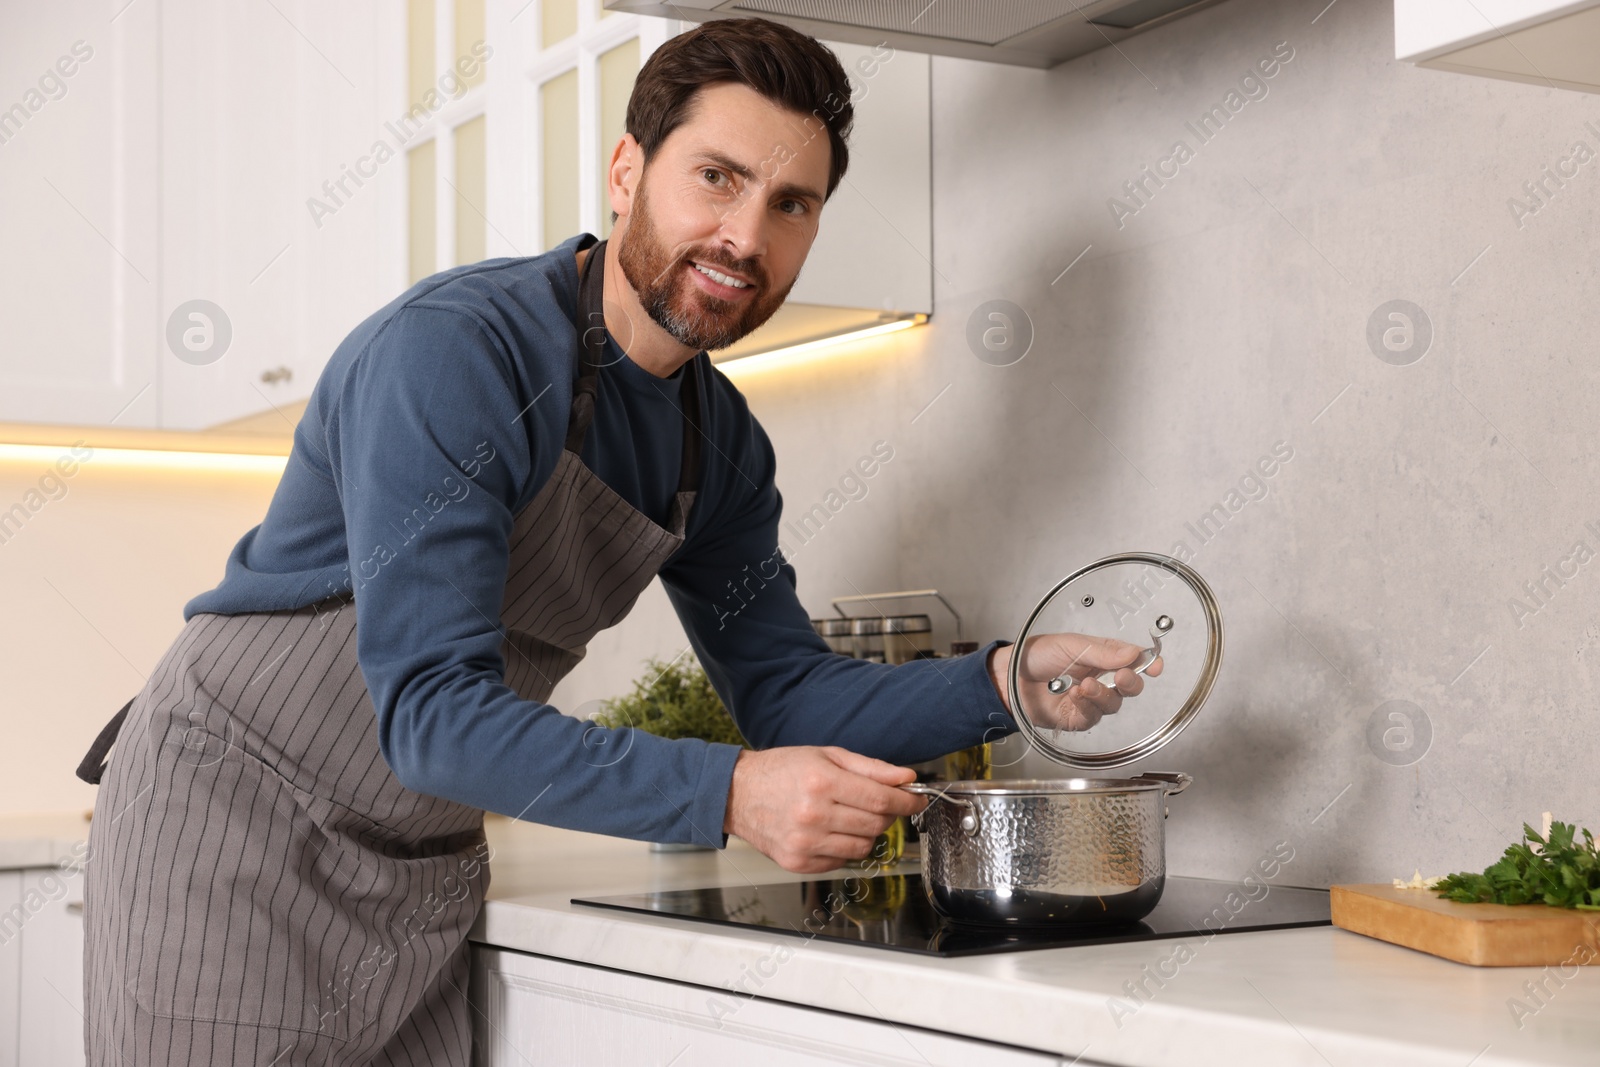 Photo of Man cooking soup on cooktop in kitchen